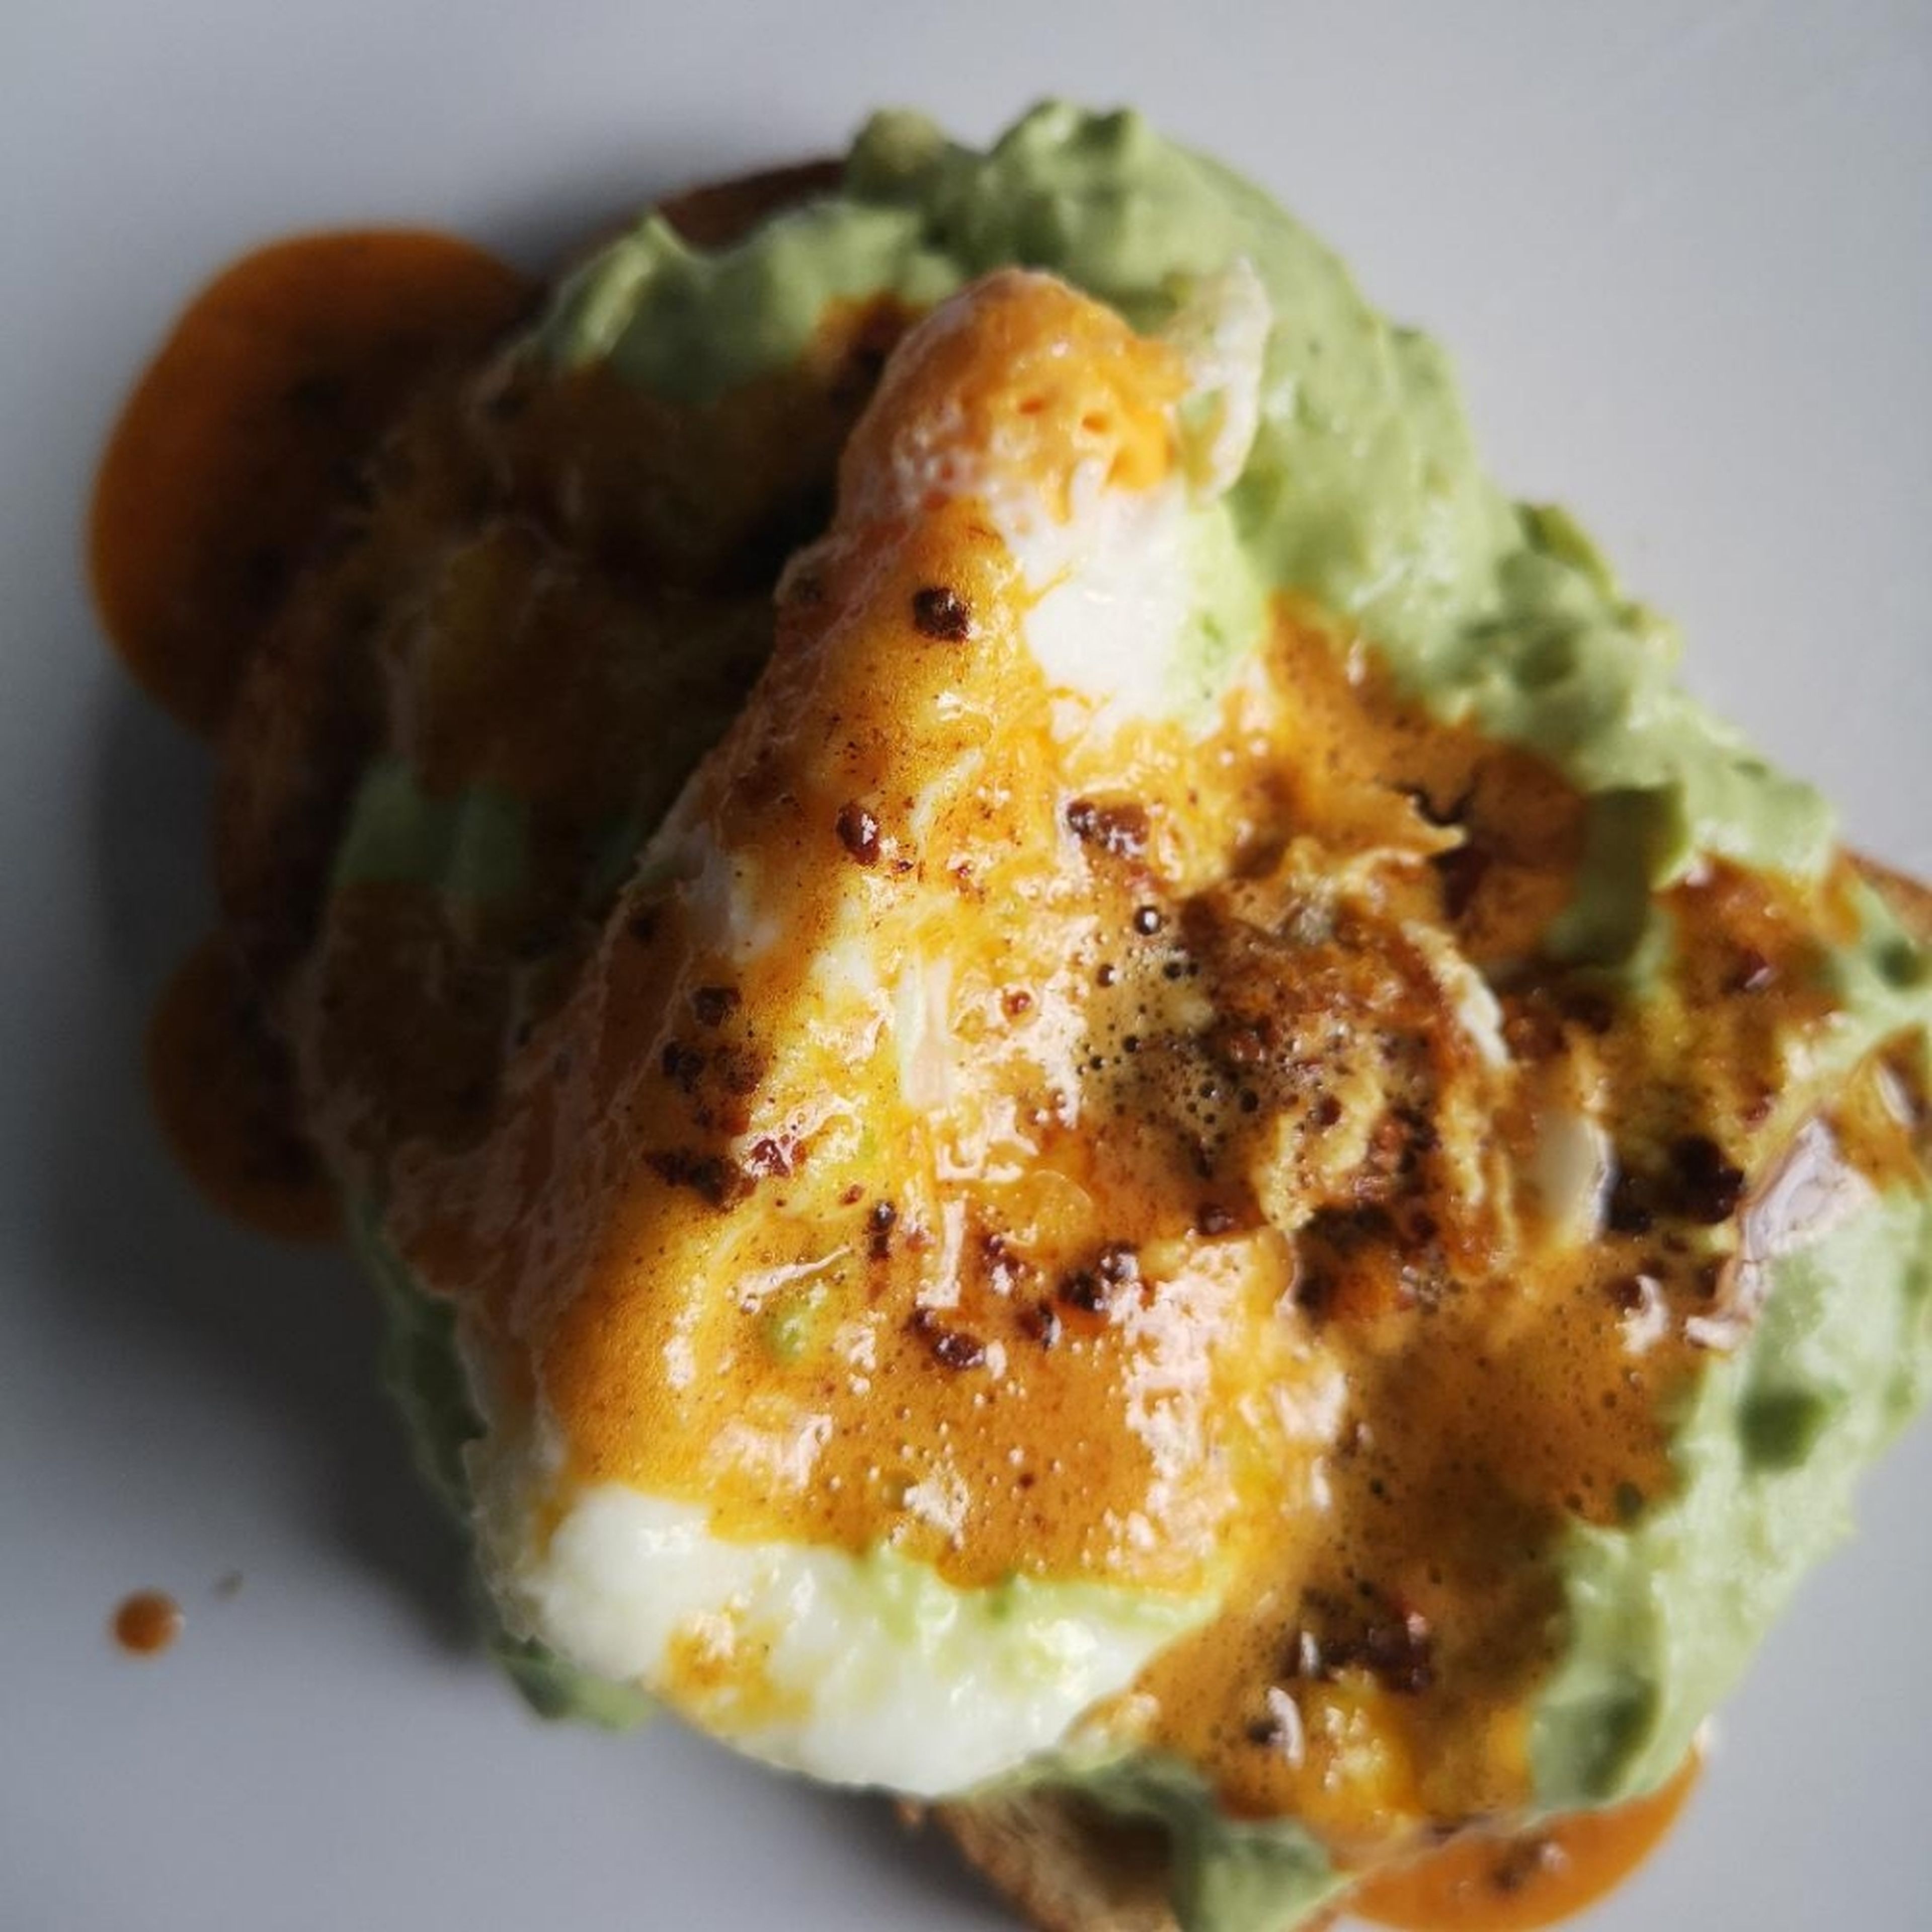 assemble your dish by spreading the avocado onto the toast, making a small hole for the egg and placing it inside. Finish by spooning the chili butter on top.